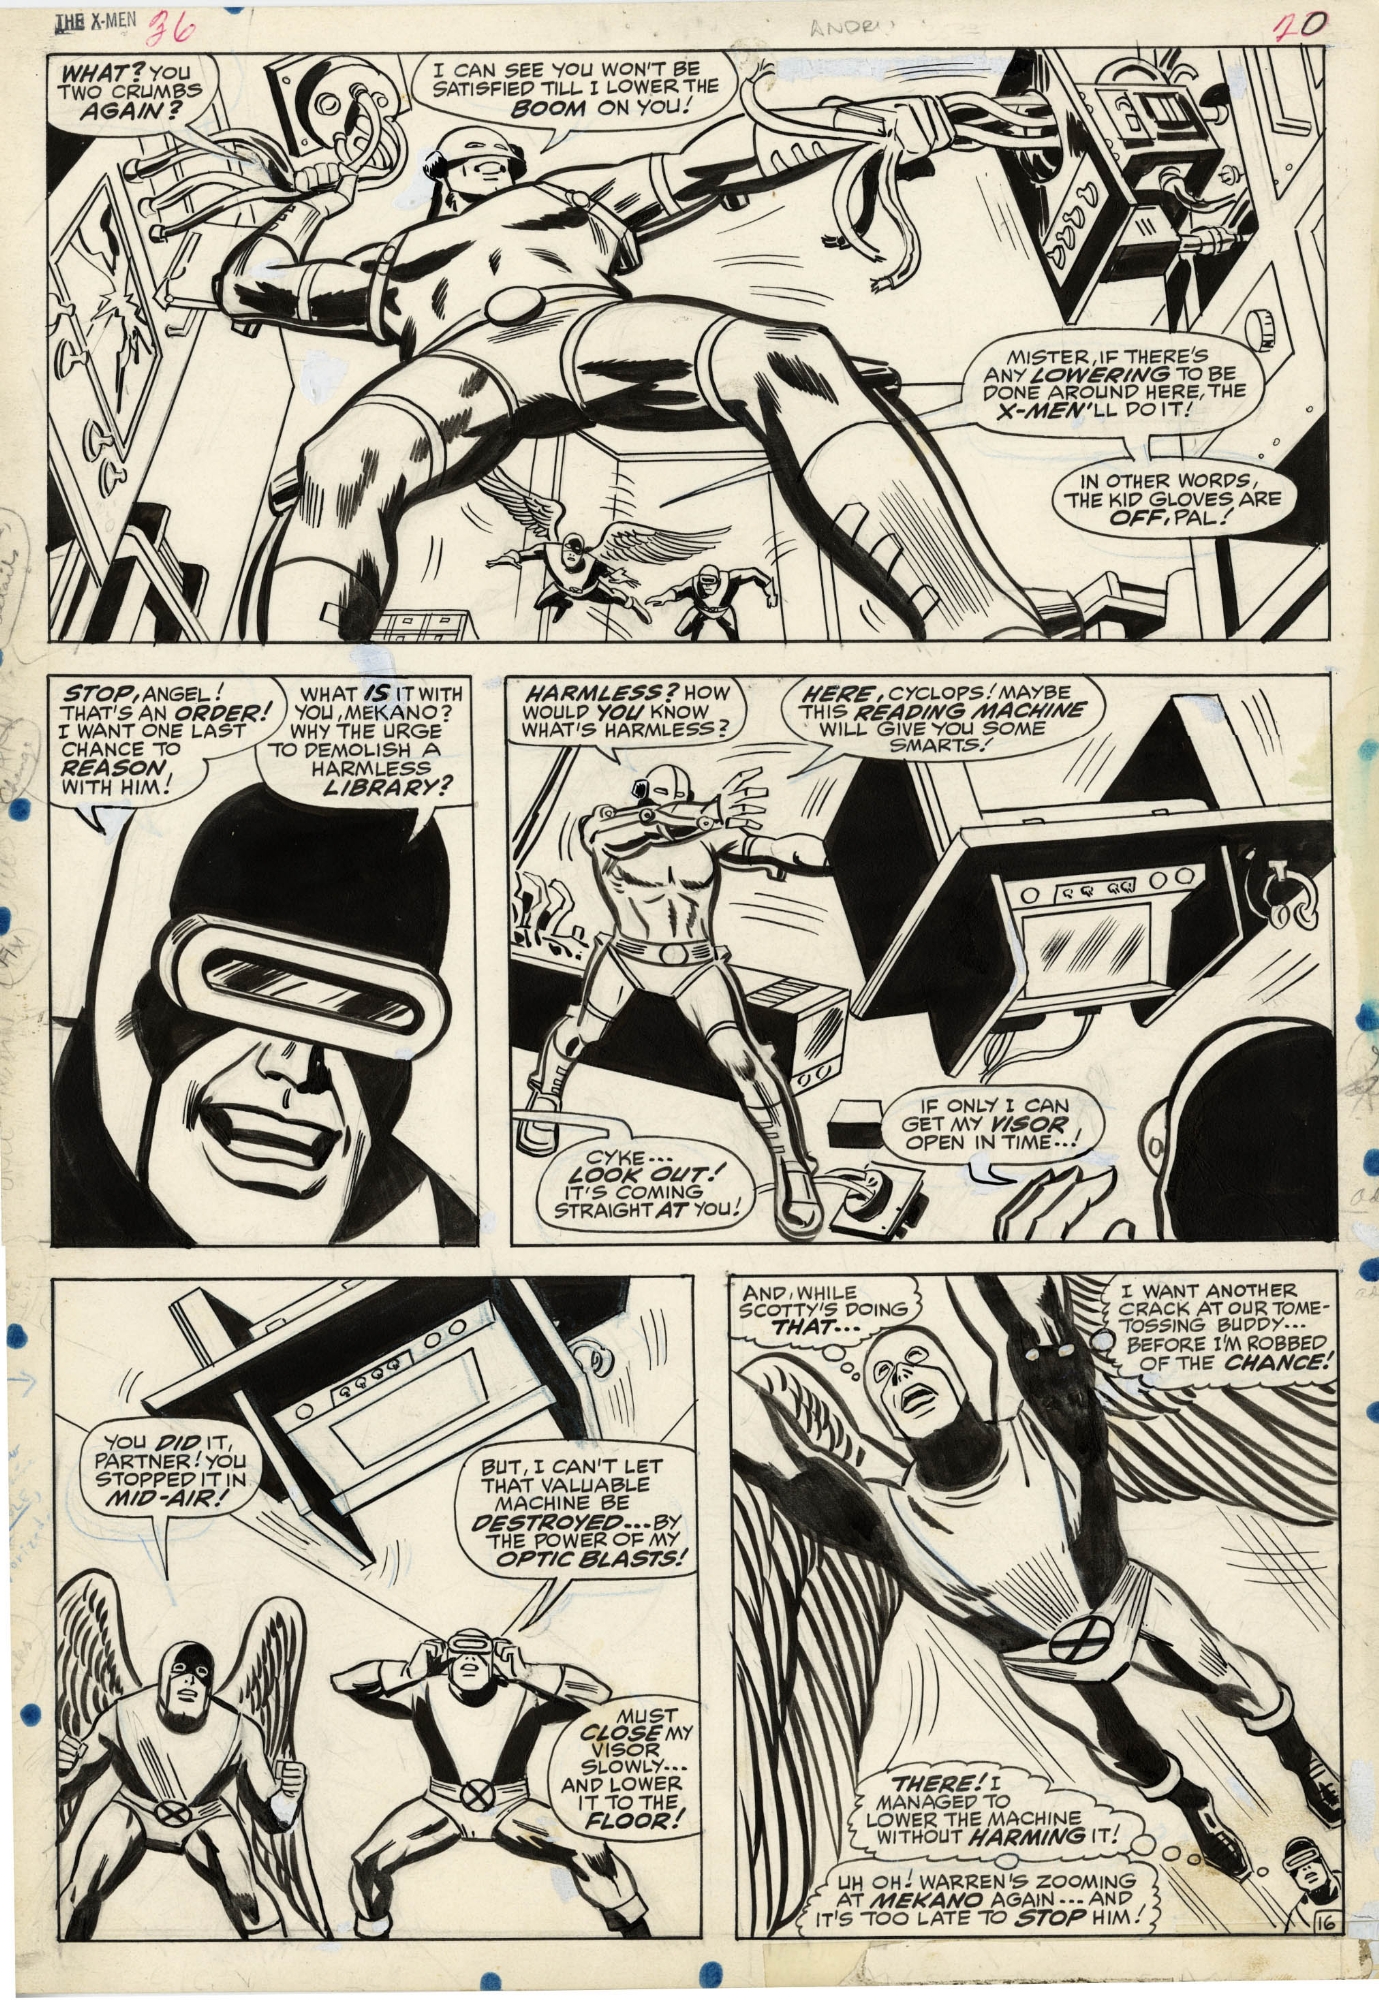 X Men 36 Page 1967 Ross Andru Large Twice Up Art Battle Page With X Men Vs Mekano In Original Art Auctions And Exchange Comiclink Com S Closed Featured Auction Highlights 08 19 Comic Art